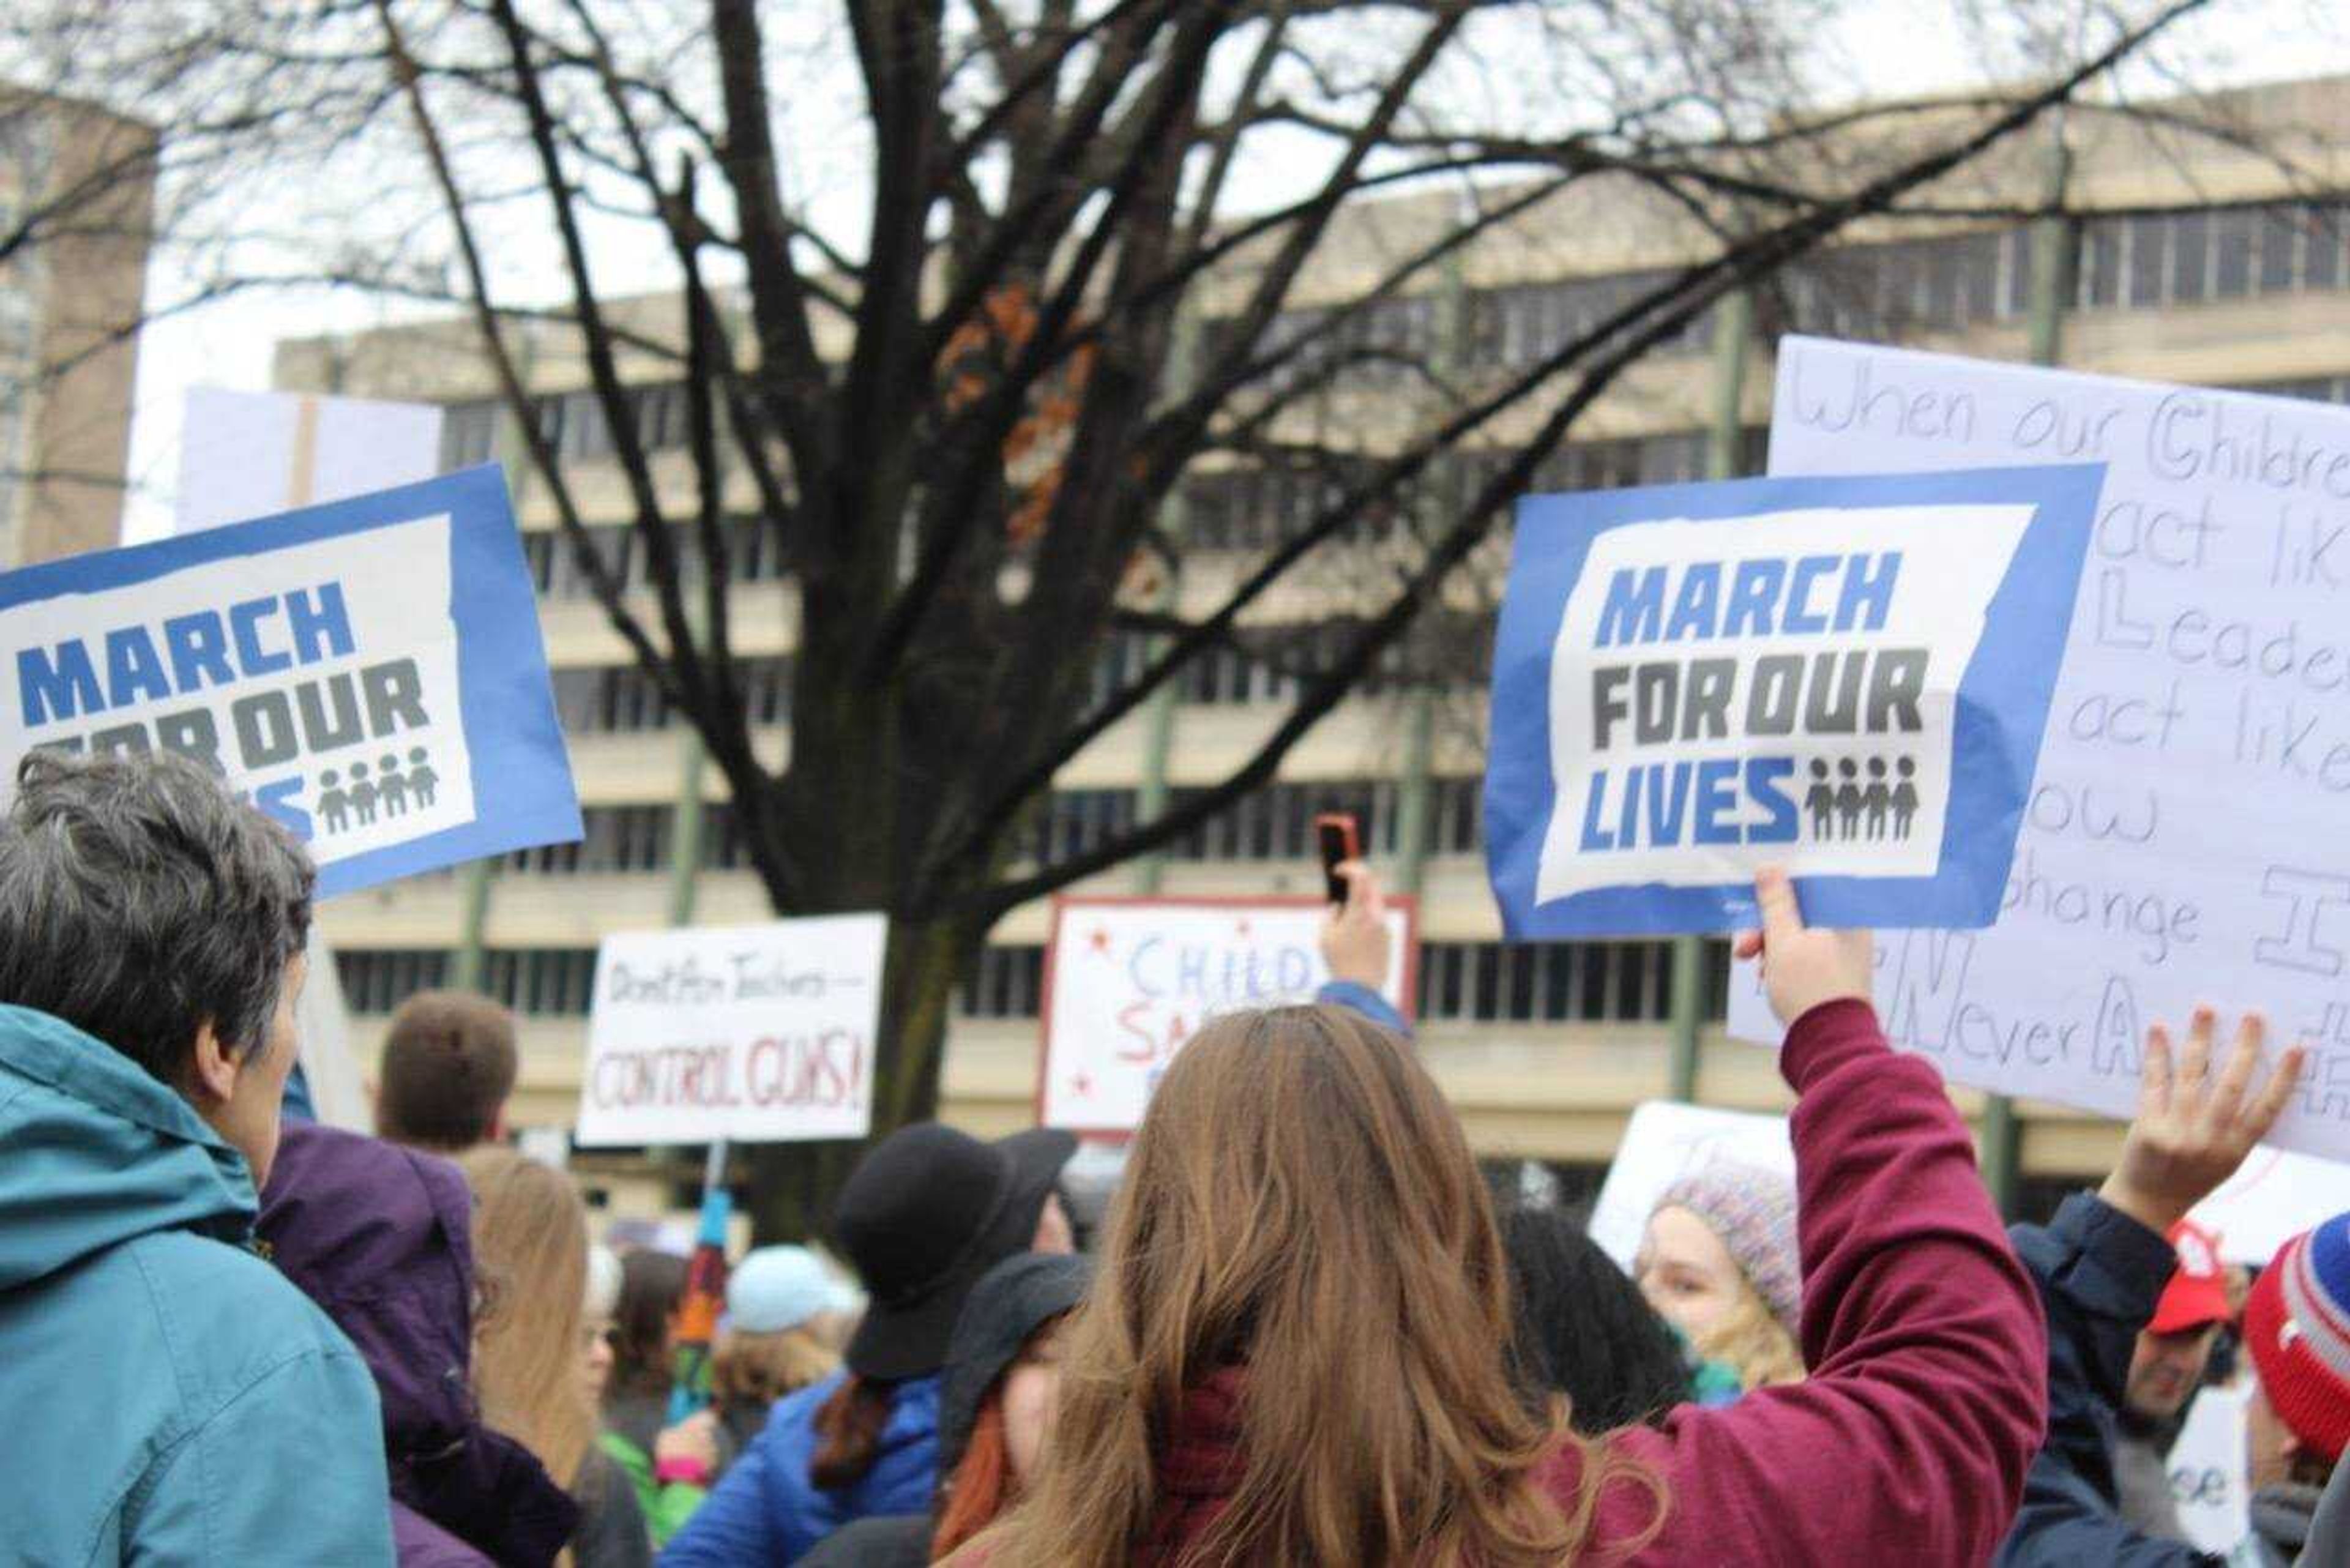 A scene from the Saint Louis March for Our Lives on March 24.